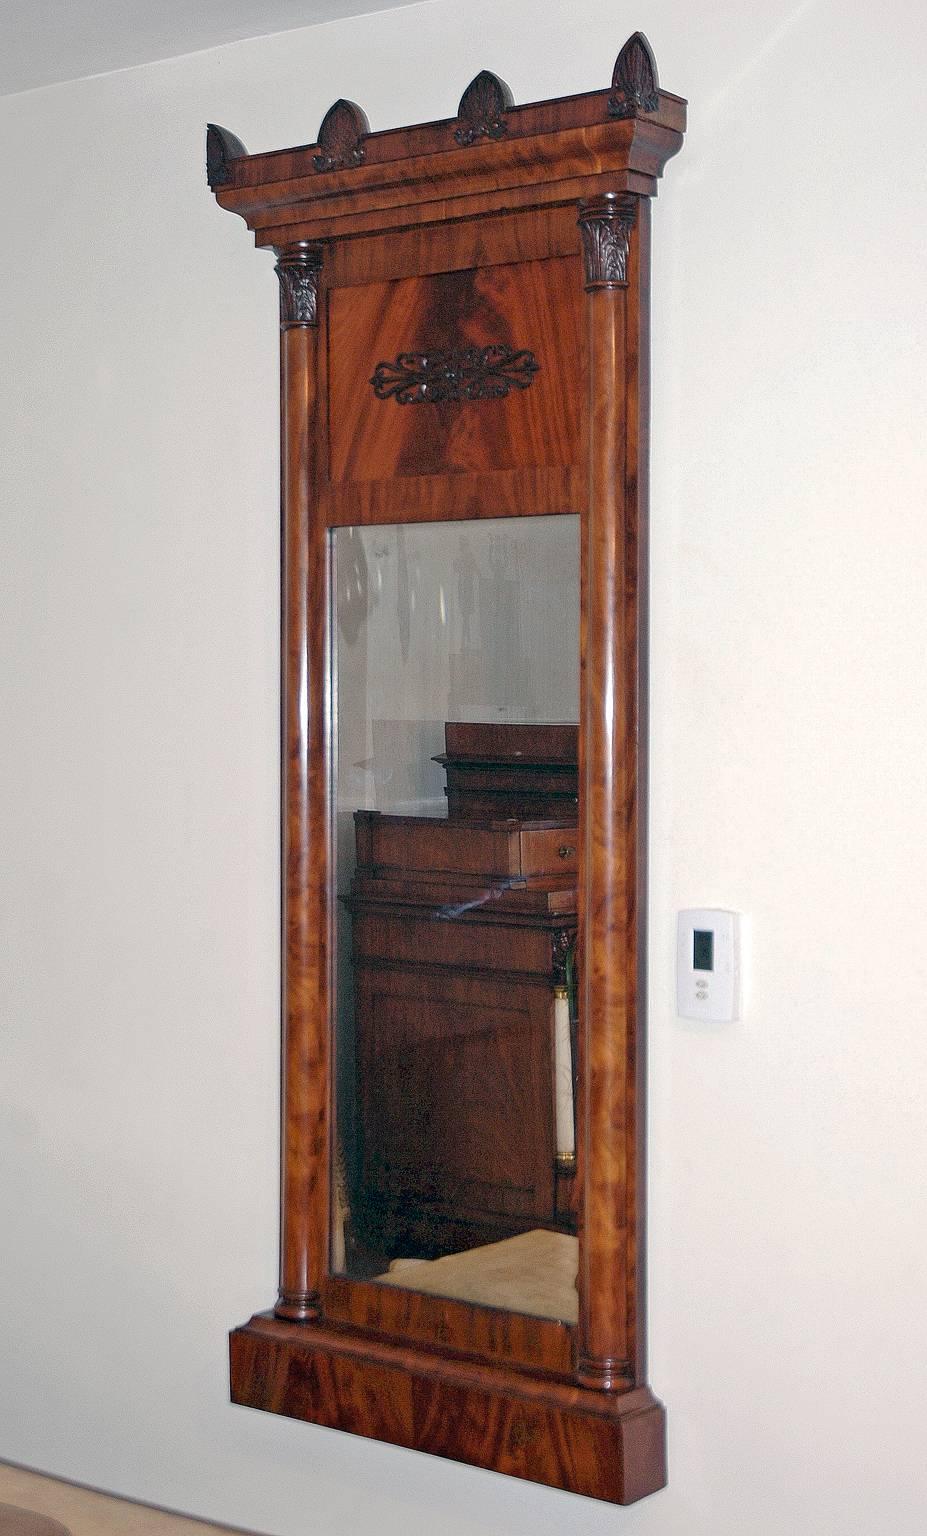 Large Empire Mirror in Cuban Mahogany with Columns and Carved Capitals, c. 1810 In Good Condition For Sale In Miami, FL